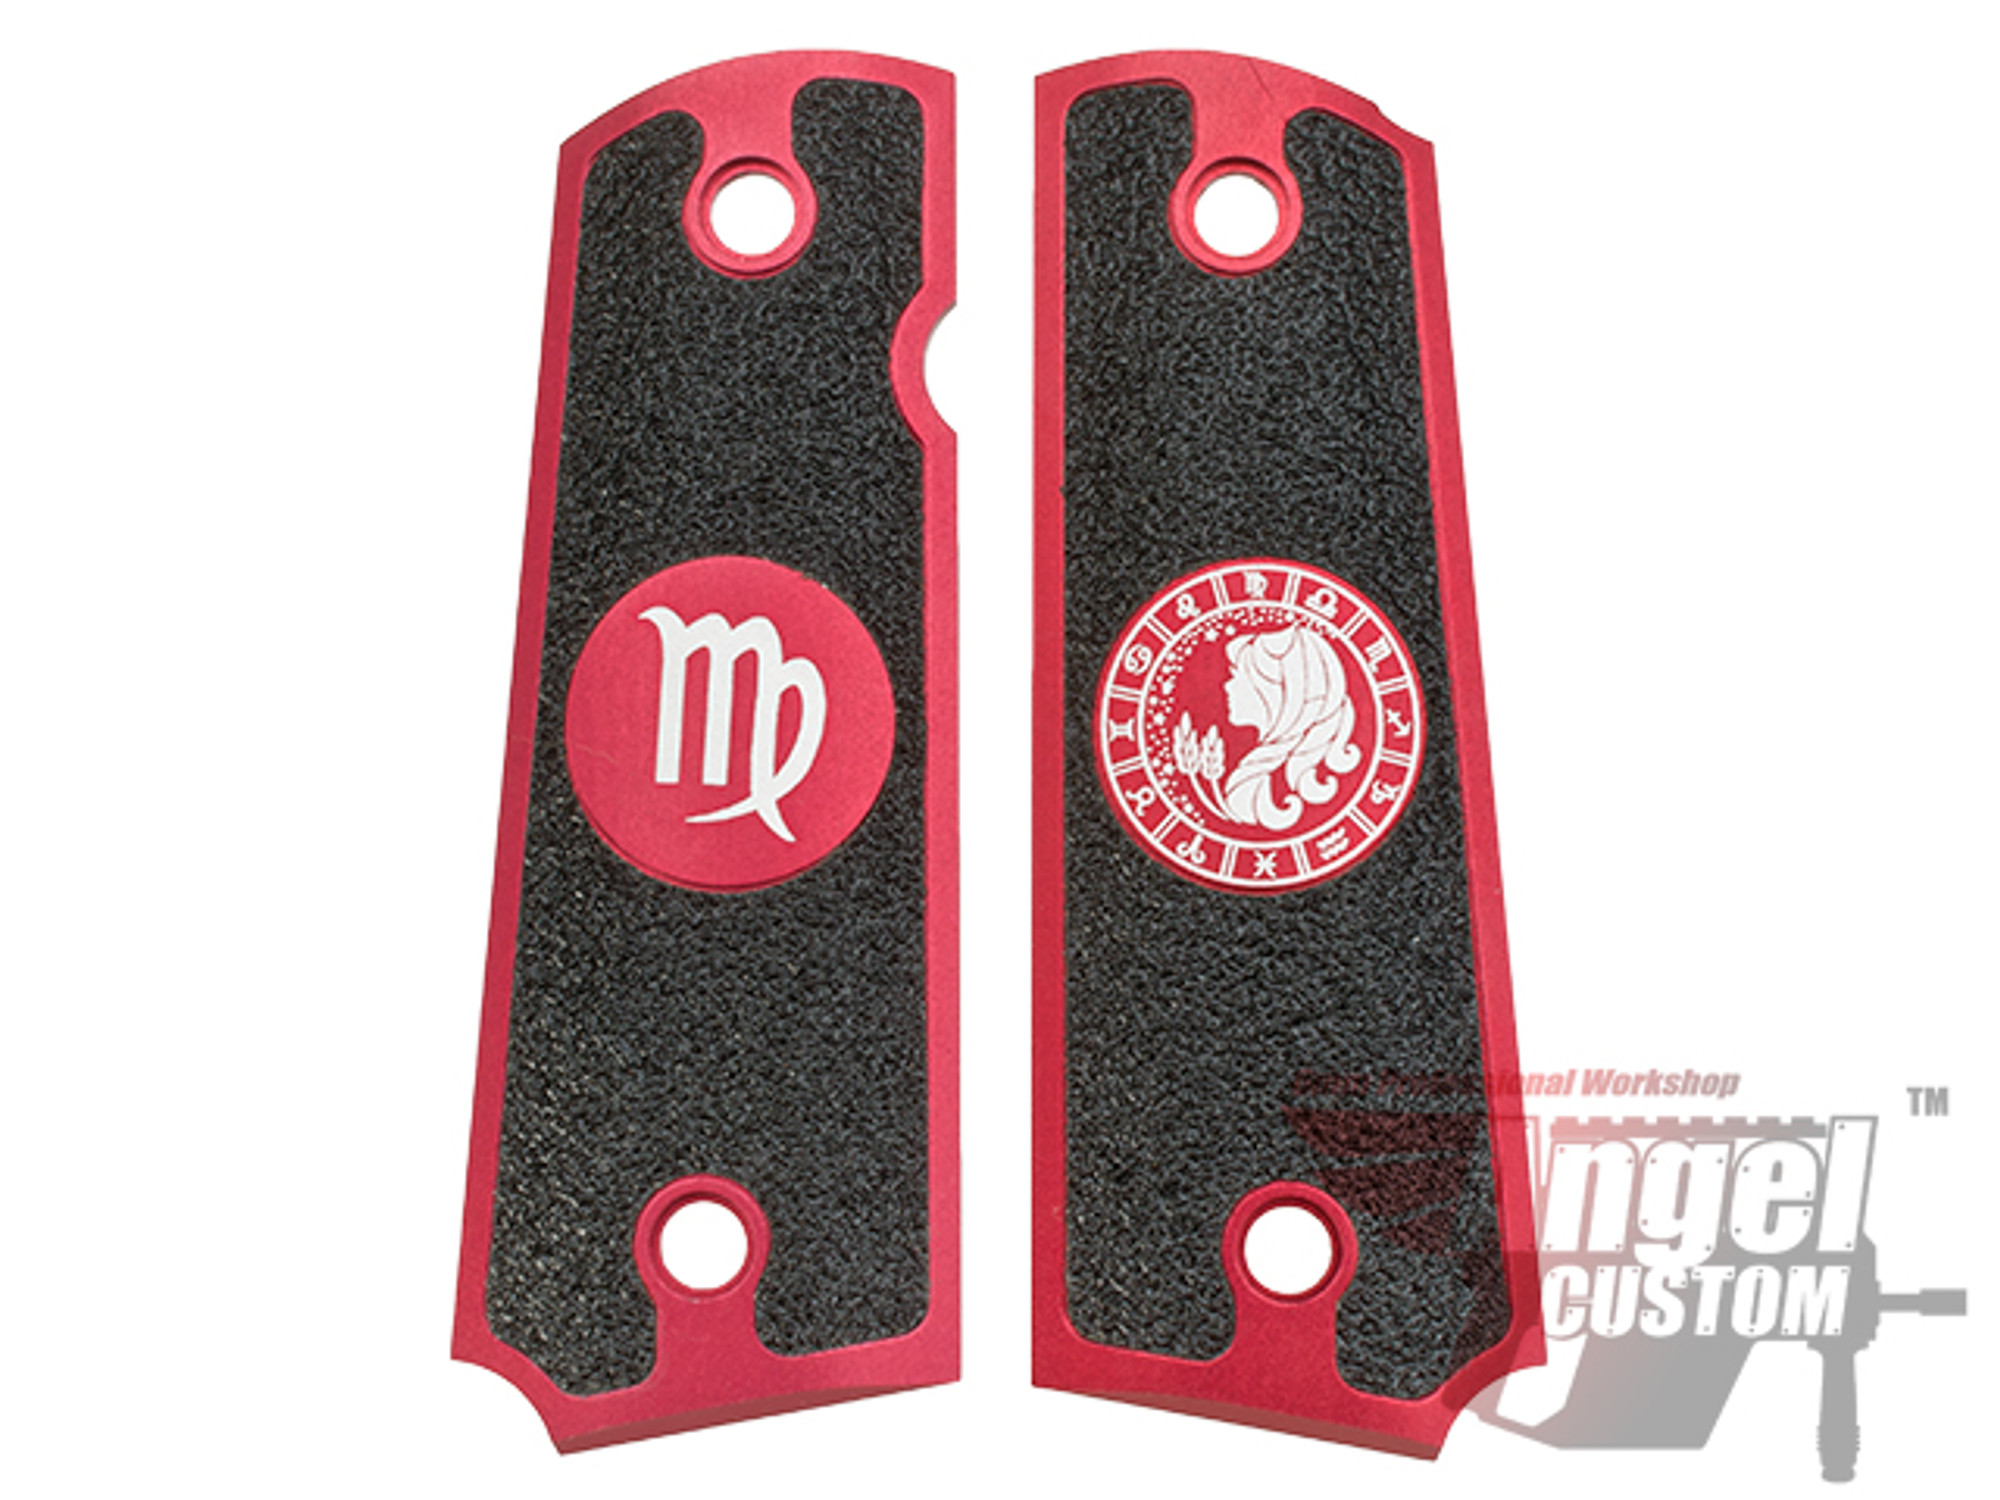 Angel Custom CNC Machined Tac-Glove "Zodiac" Grips for Tokyo Marui/KWA/Western Arms 1911 Series Airsoft Pistols - Virgo (Red)